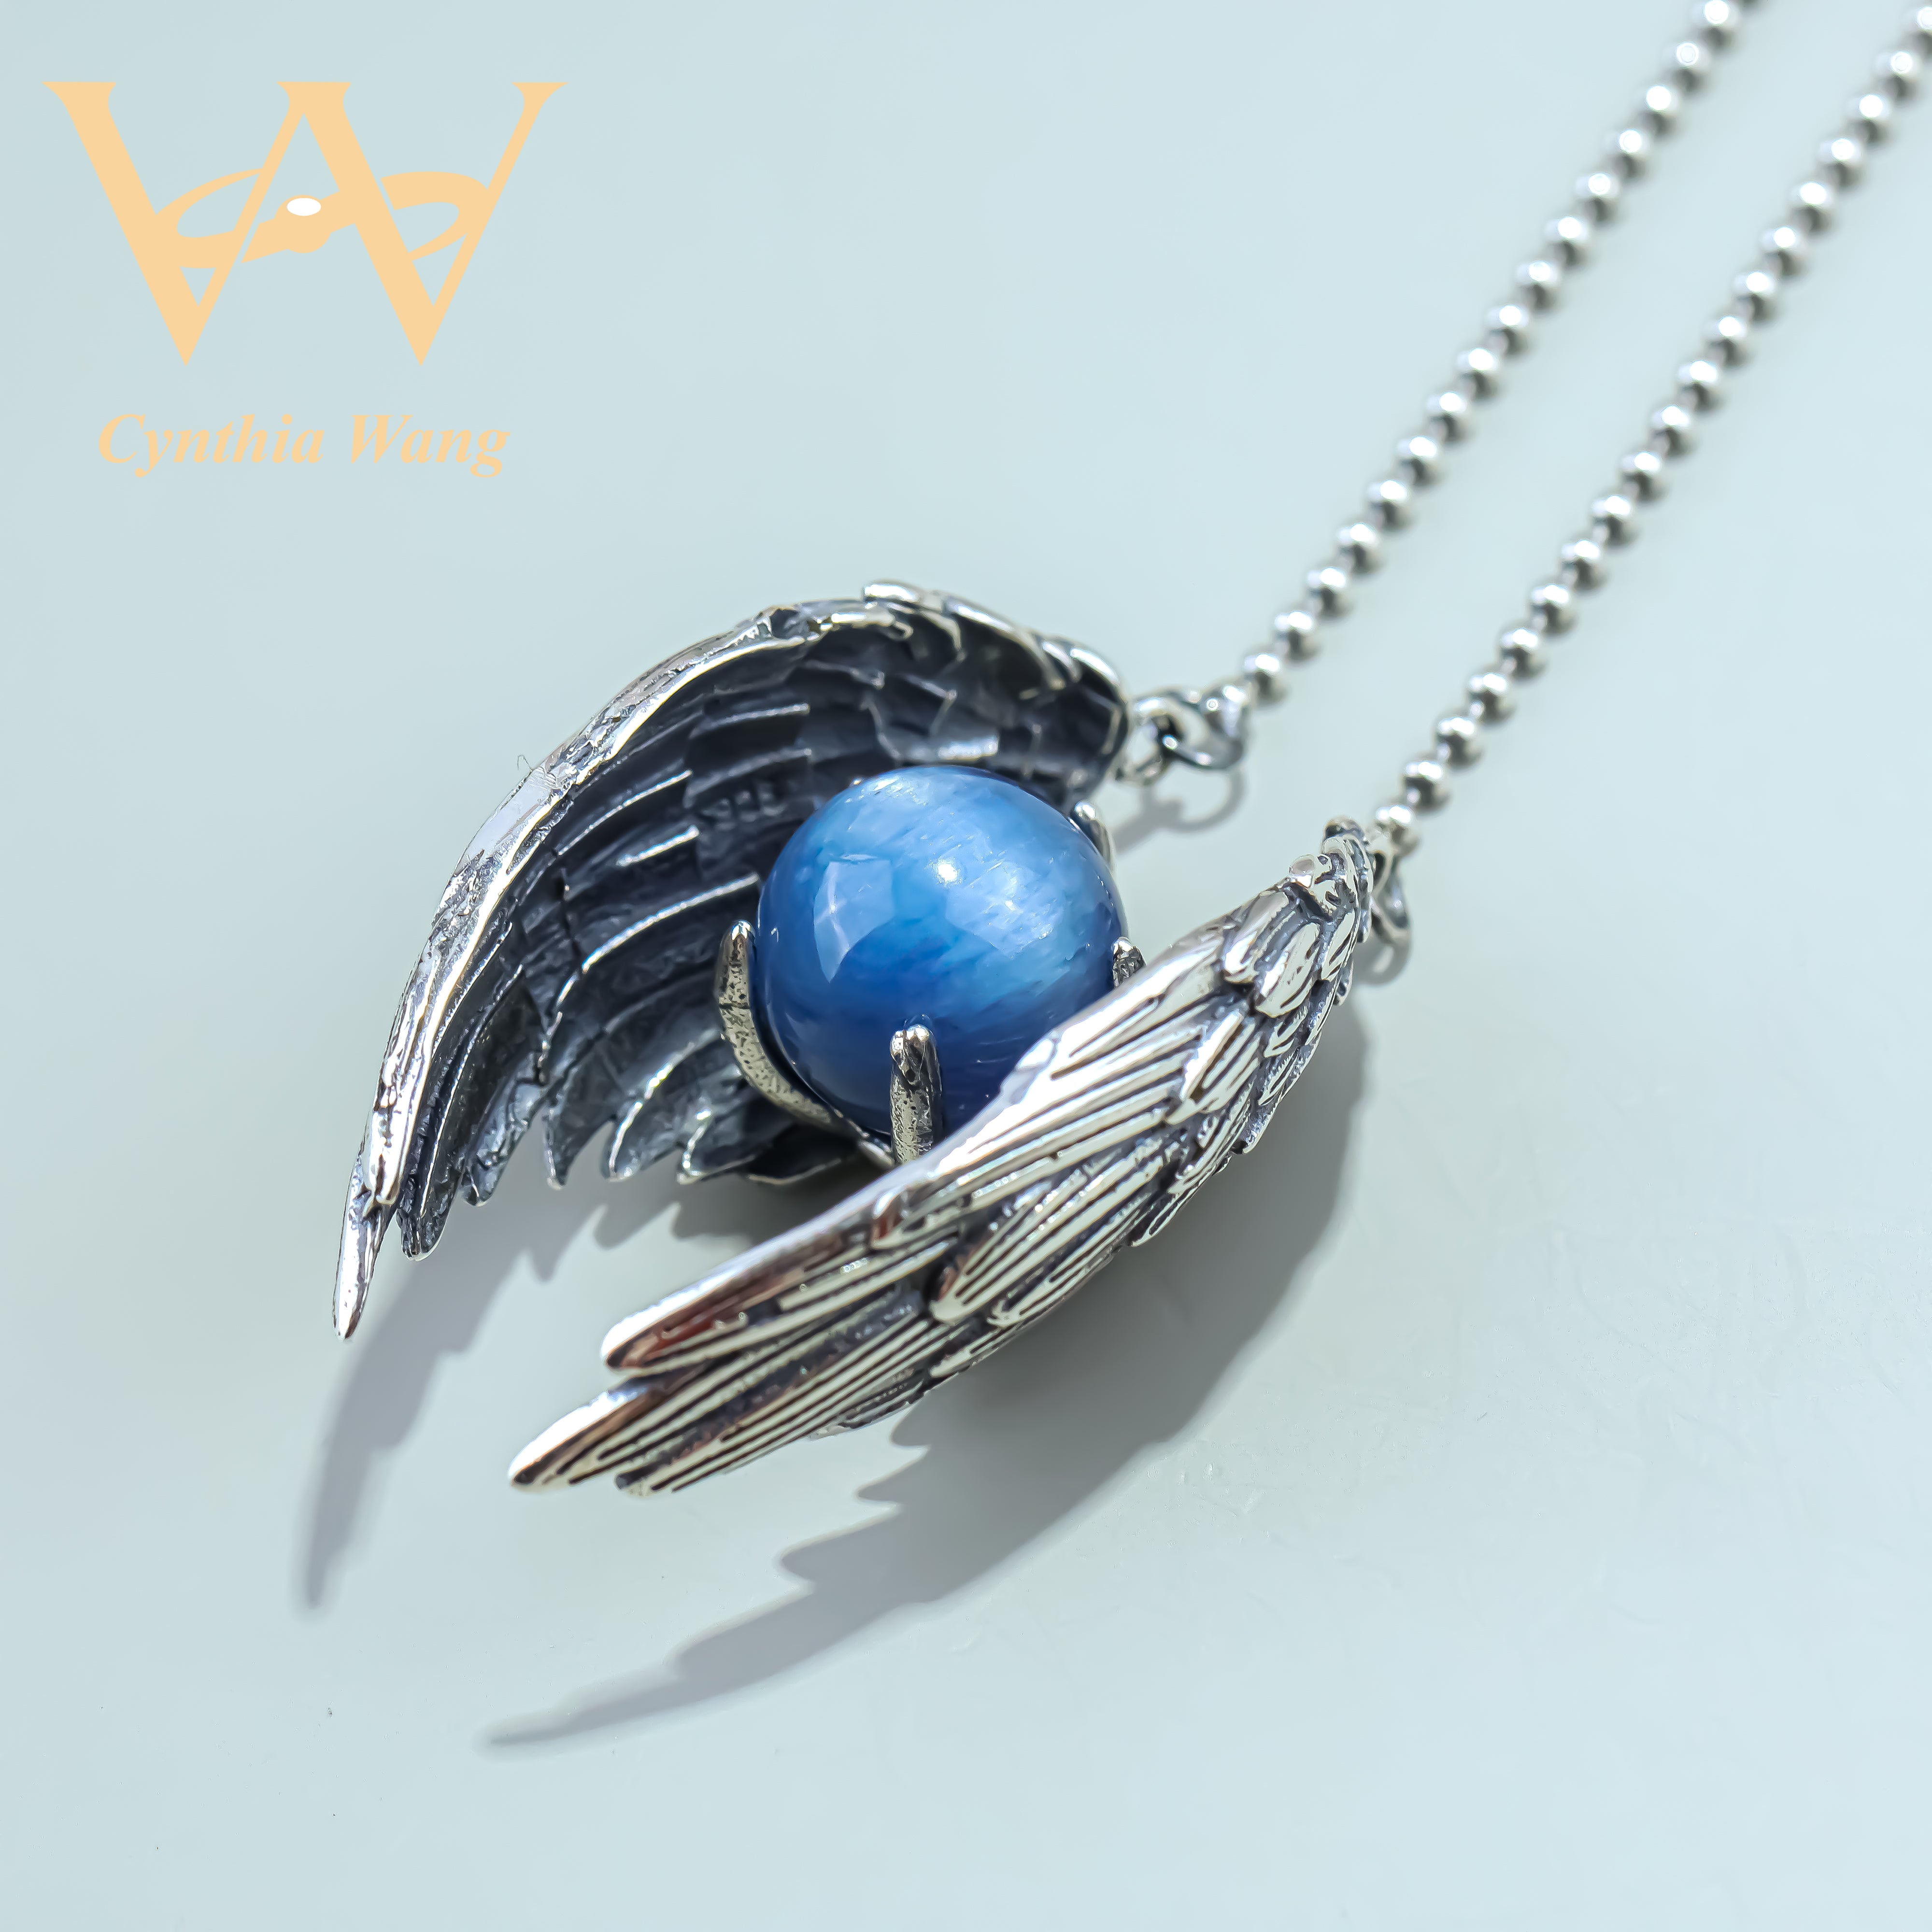 'Winged Reverie' Kyanite Necklace